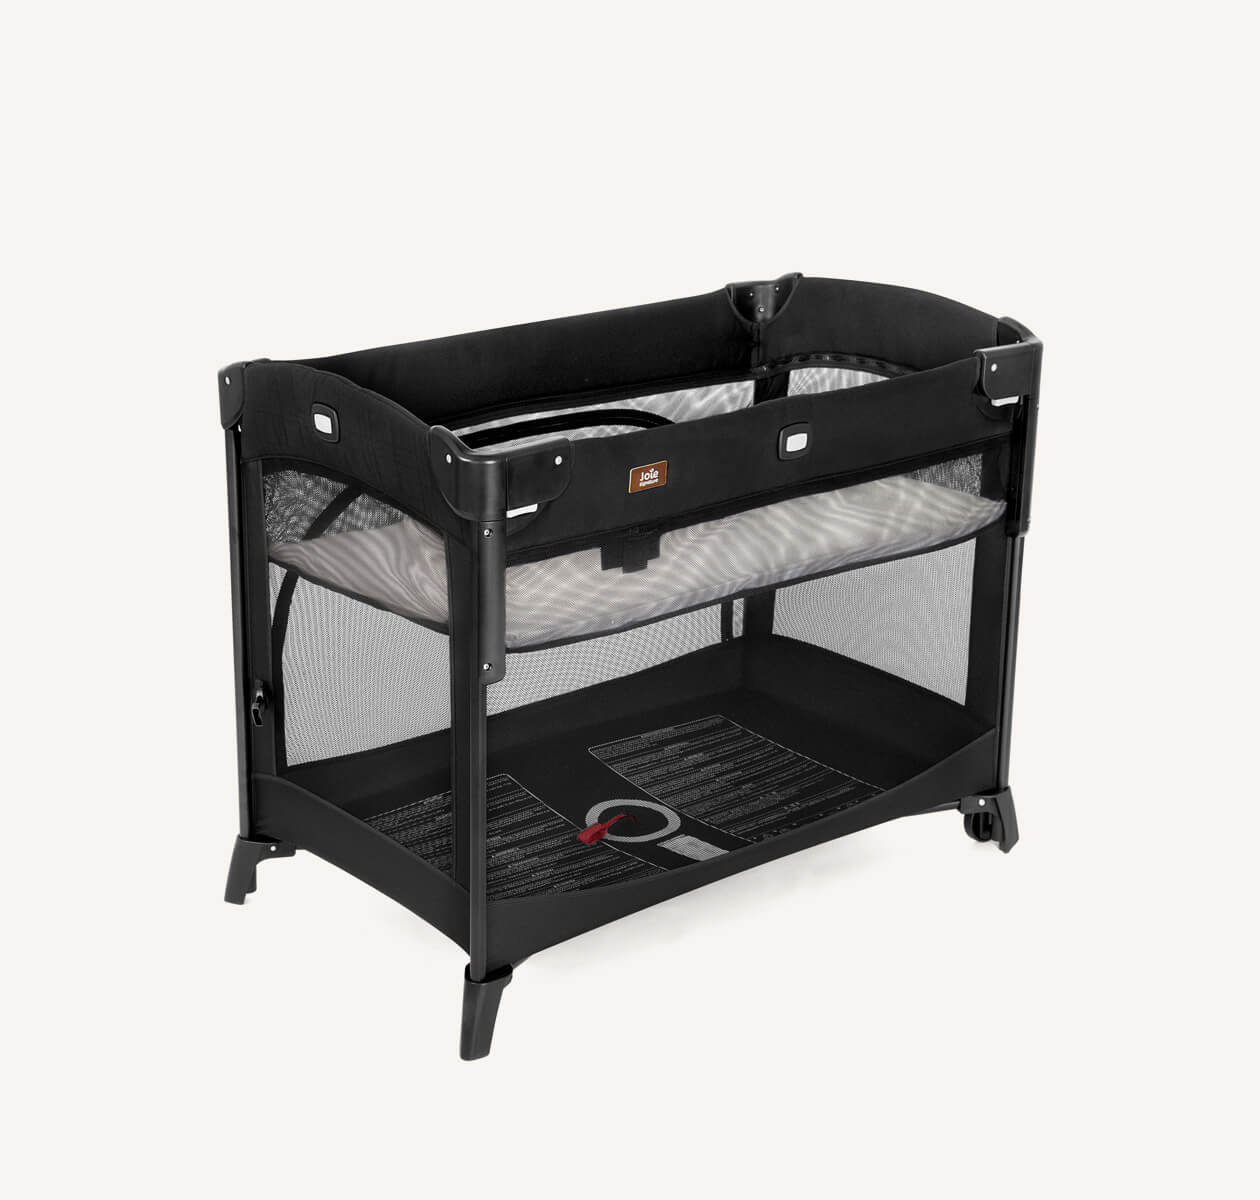 Joie kubbie sleep bedside cot in black at an angle.